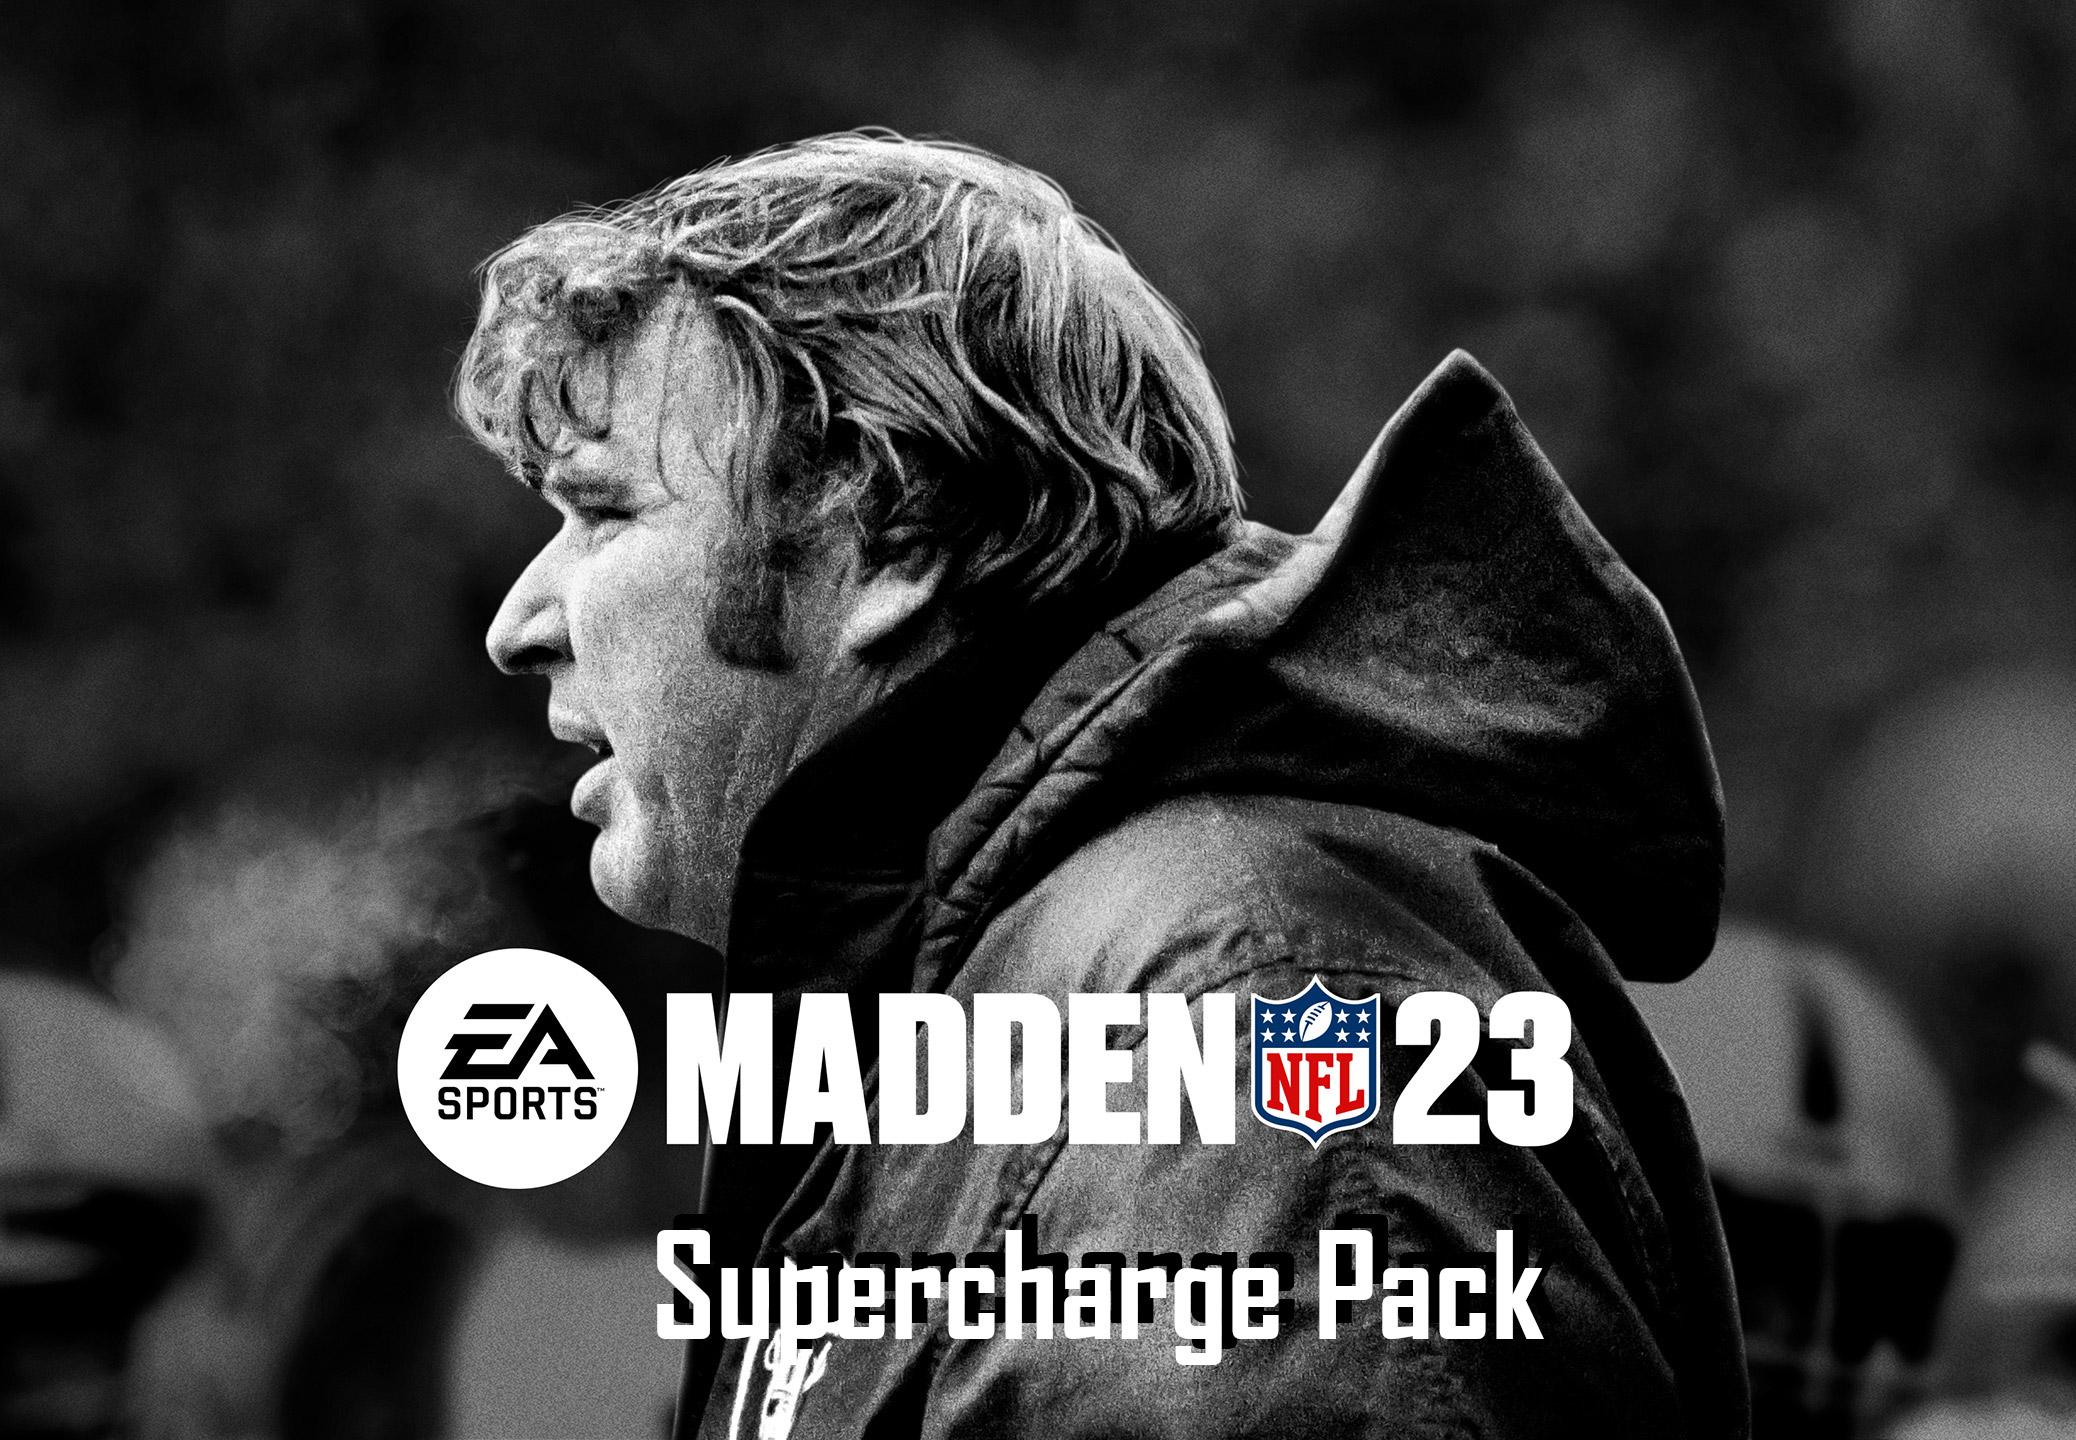 Madden NFL 23 - Supercharge Pack DLC XBOX Series X|S CD Key